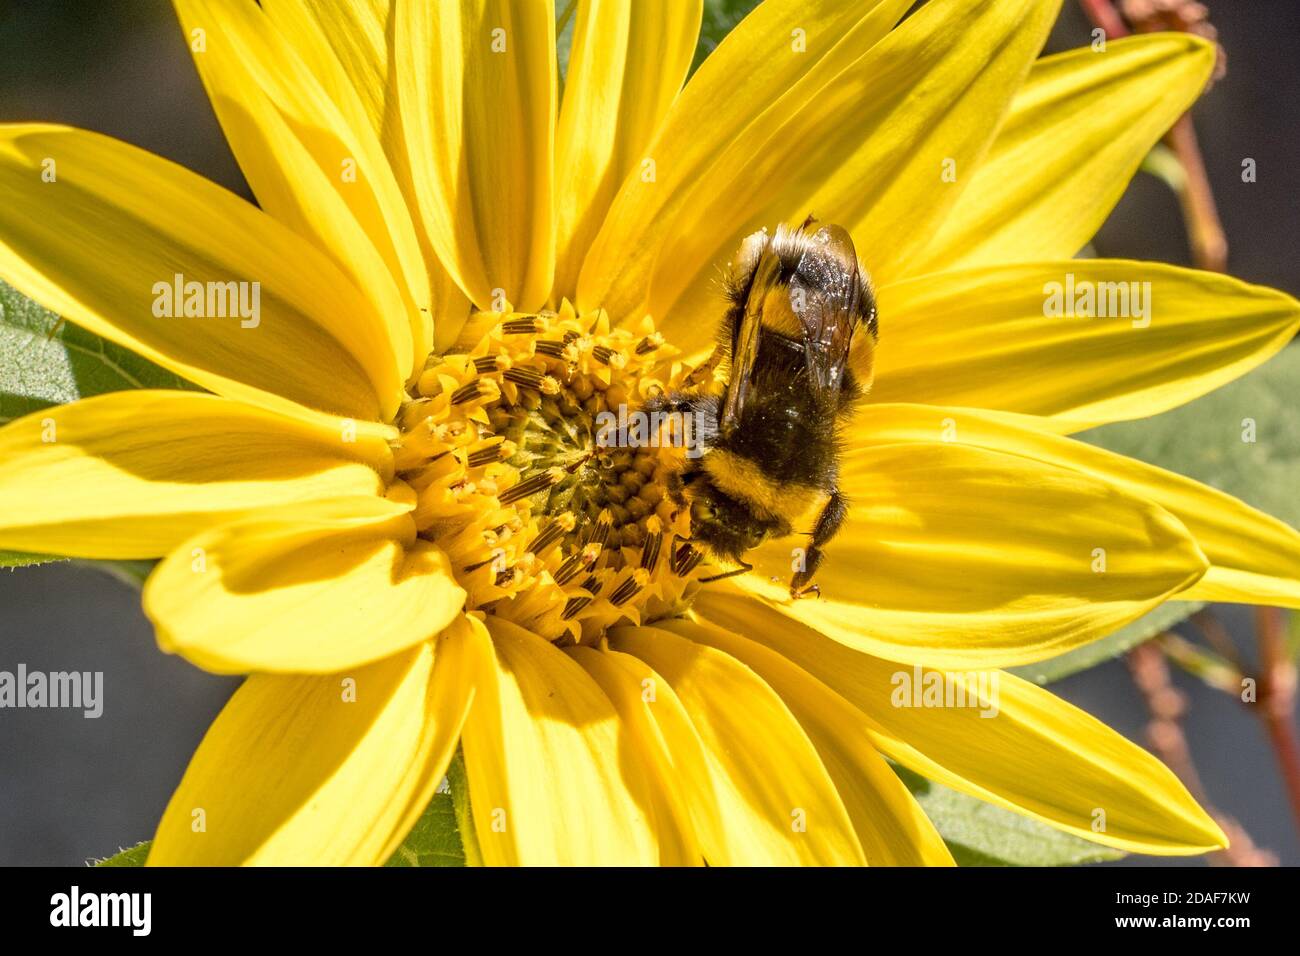 Bee Collecting Pollen / Nectar on Yellow Flower Stock Photo